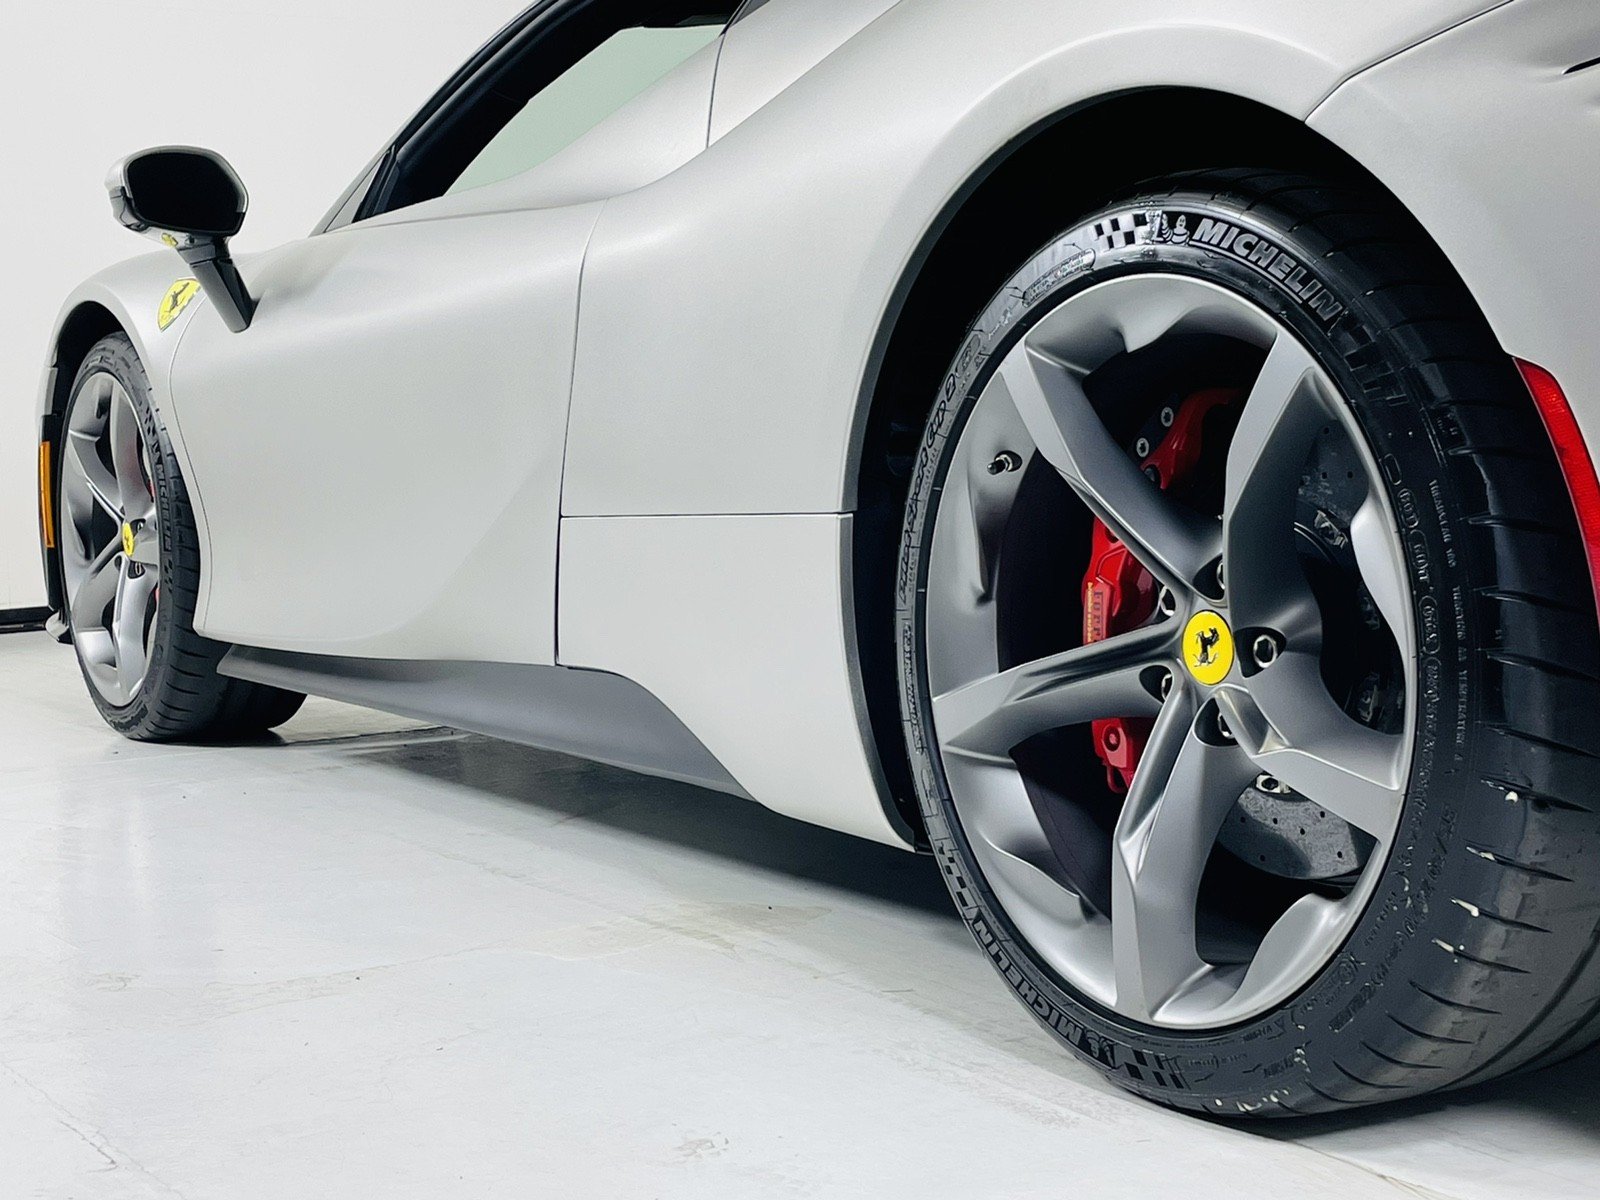 USED 2021 FERRARI SF90 STRADALE COUPE W A 650K MSRP FOR SALE (26)